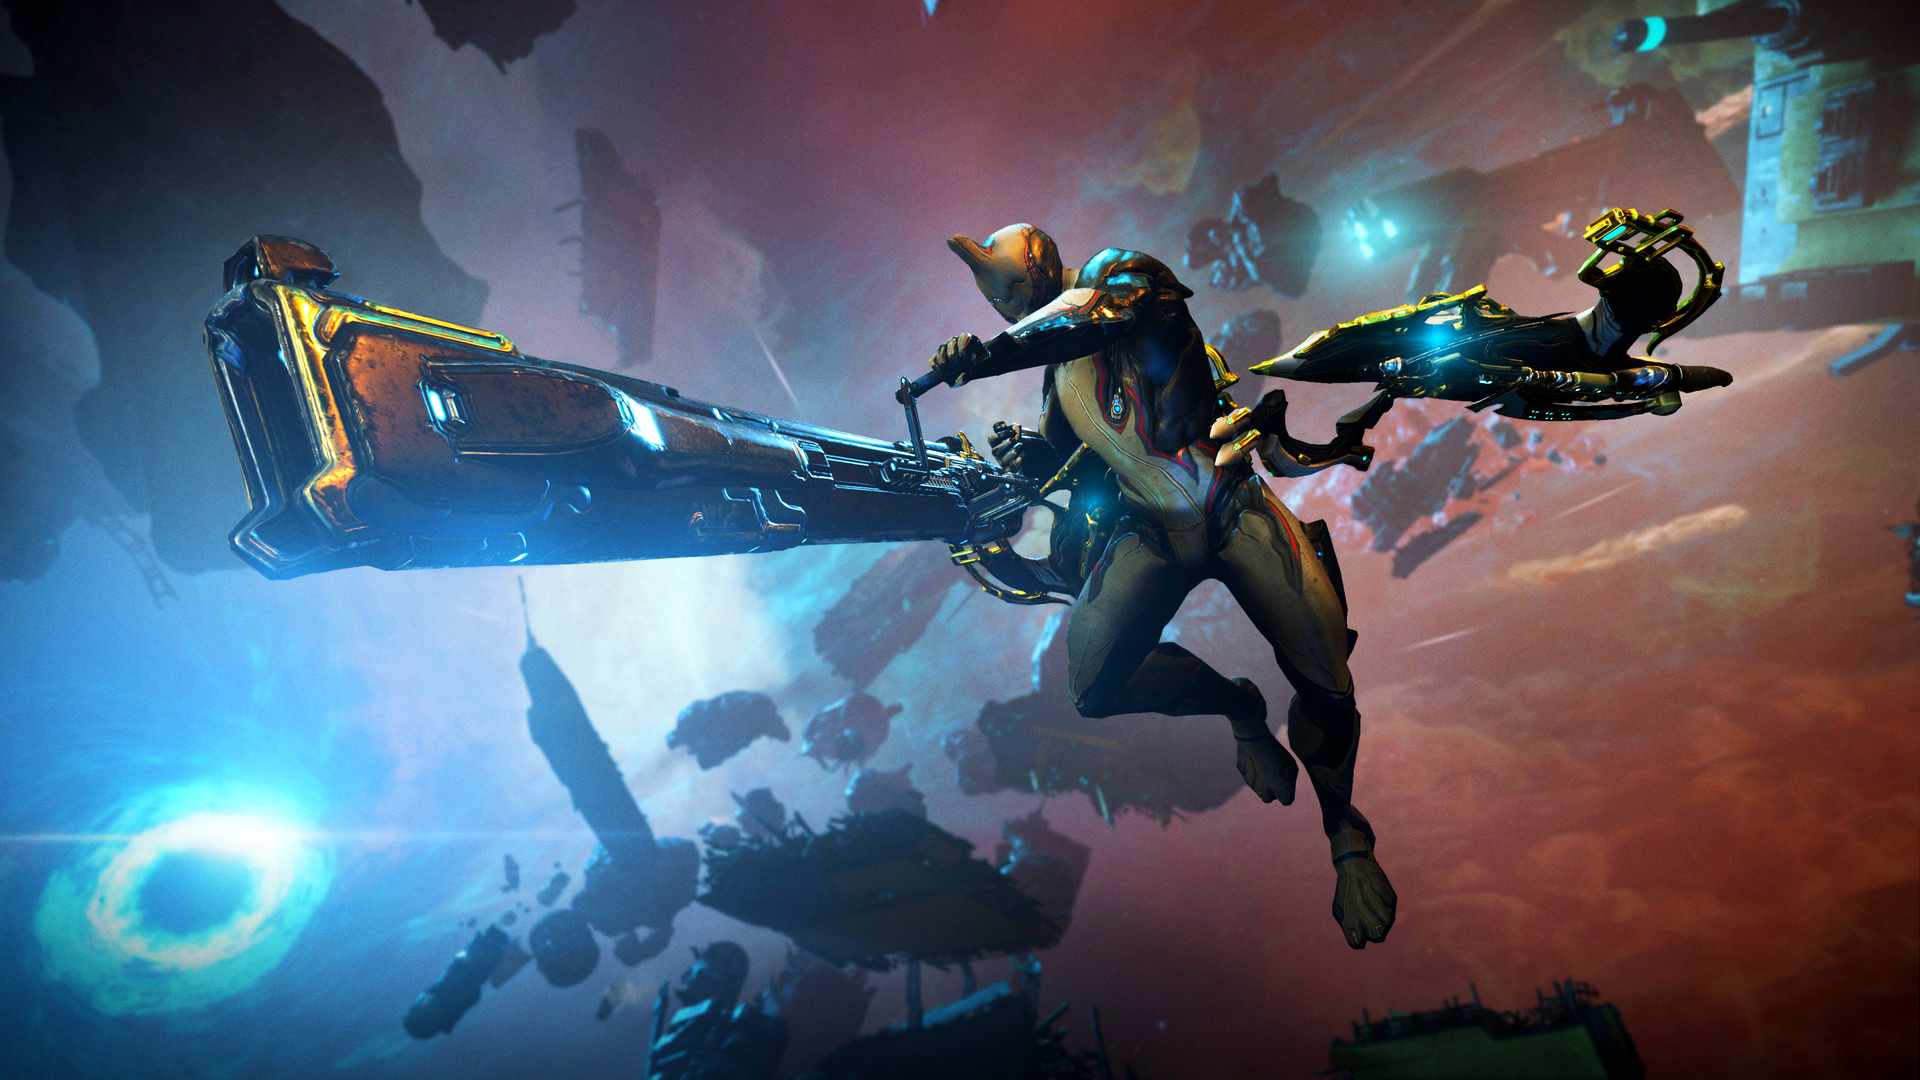 Despite being a fair, free-to-play game, Warframe is one of the many live-service titles designed in a way that resembles a job rather than a game.